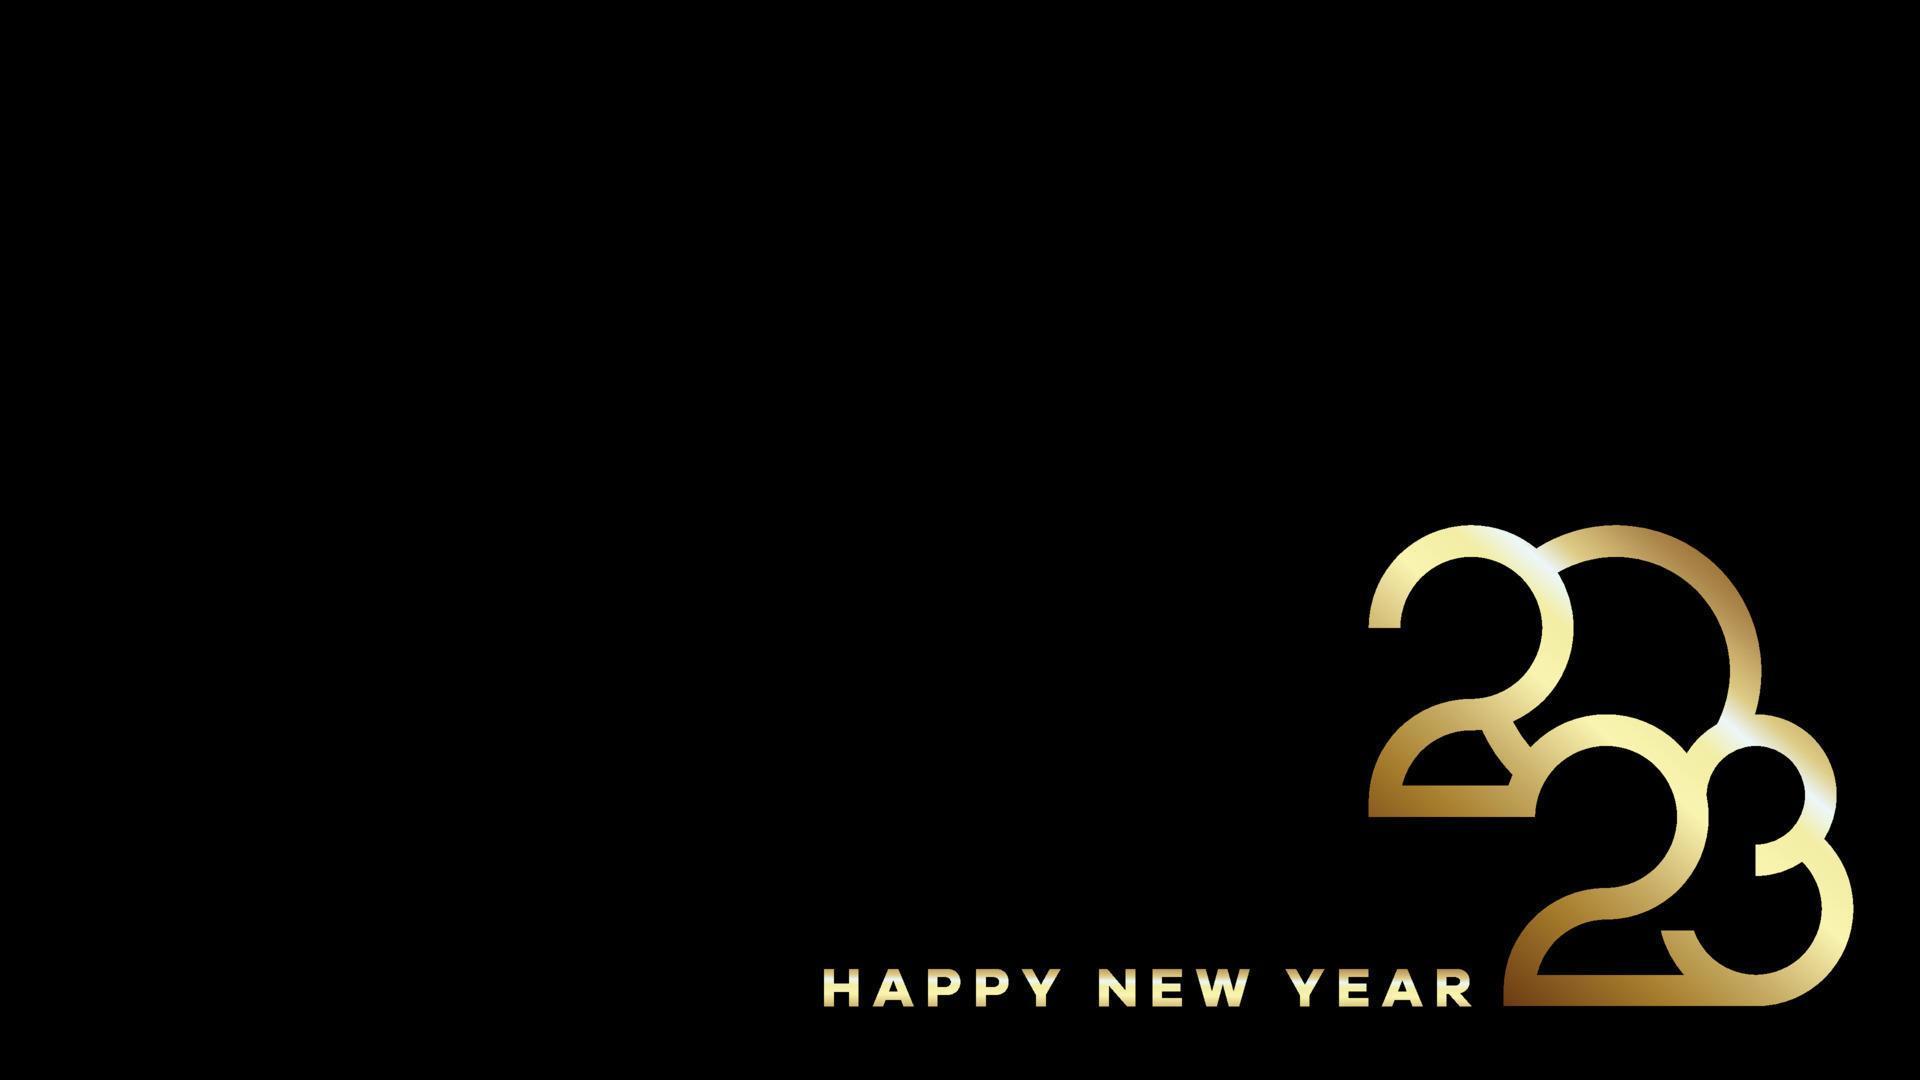 General 1920x1080 New Year simple background black background minimalism holiday